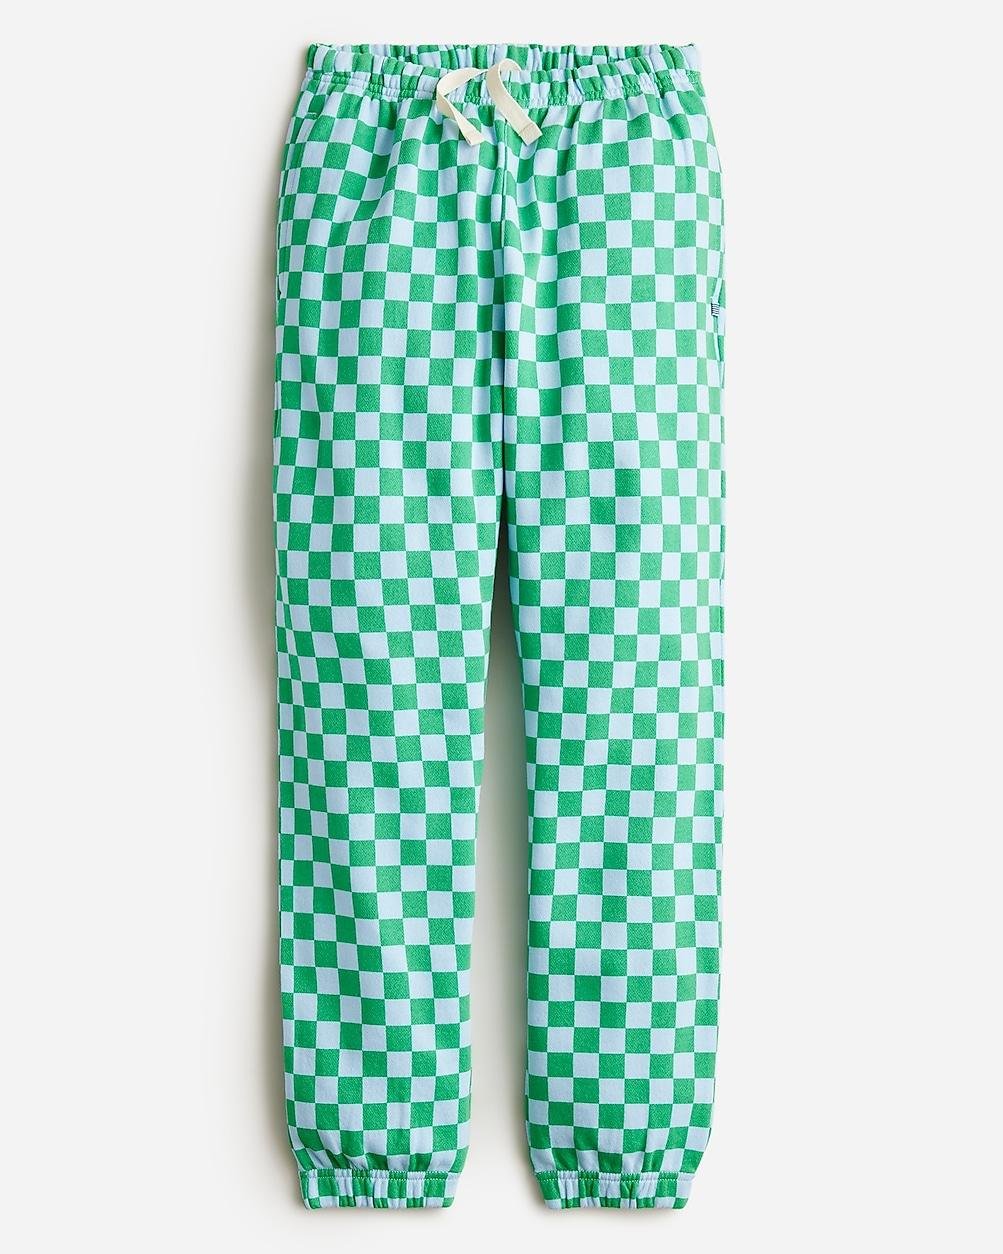 KID by Crewcuts garment-dyed sweatpant in checkerboard print by J.CREW